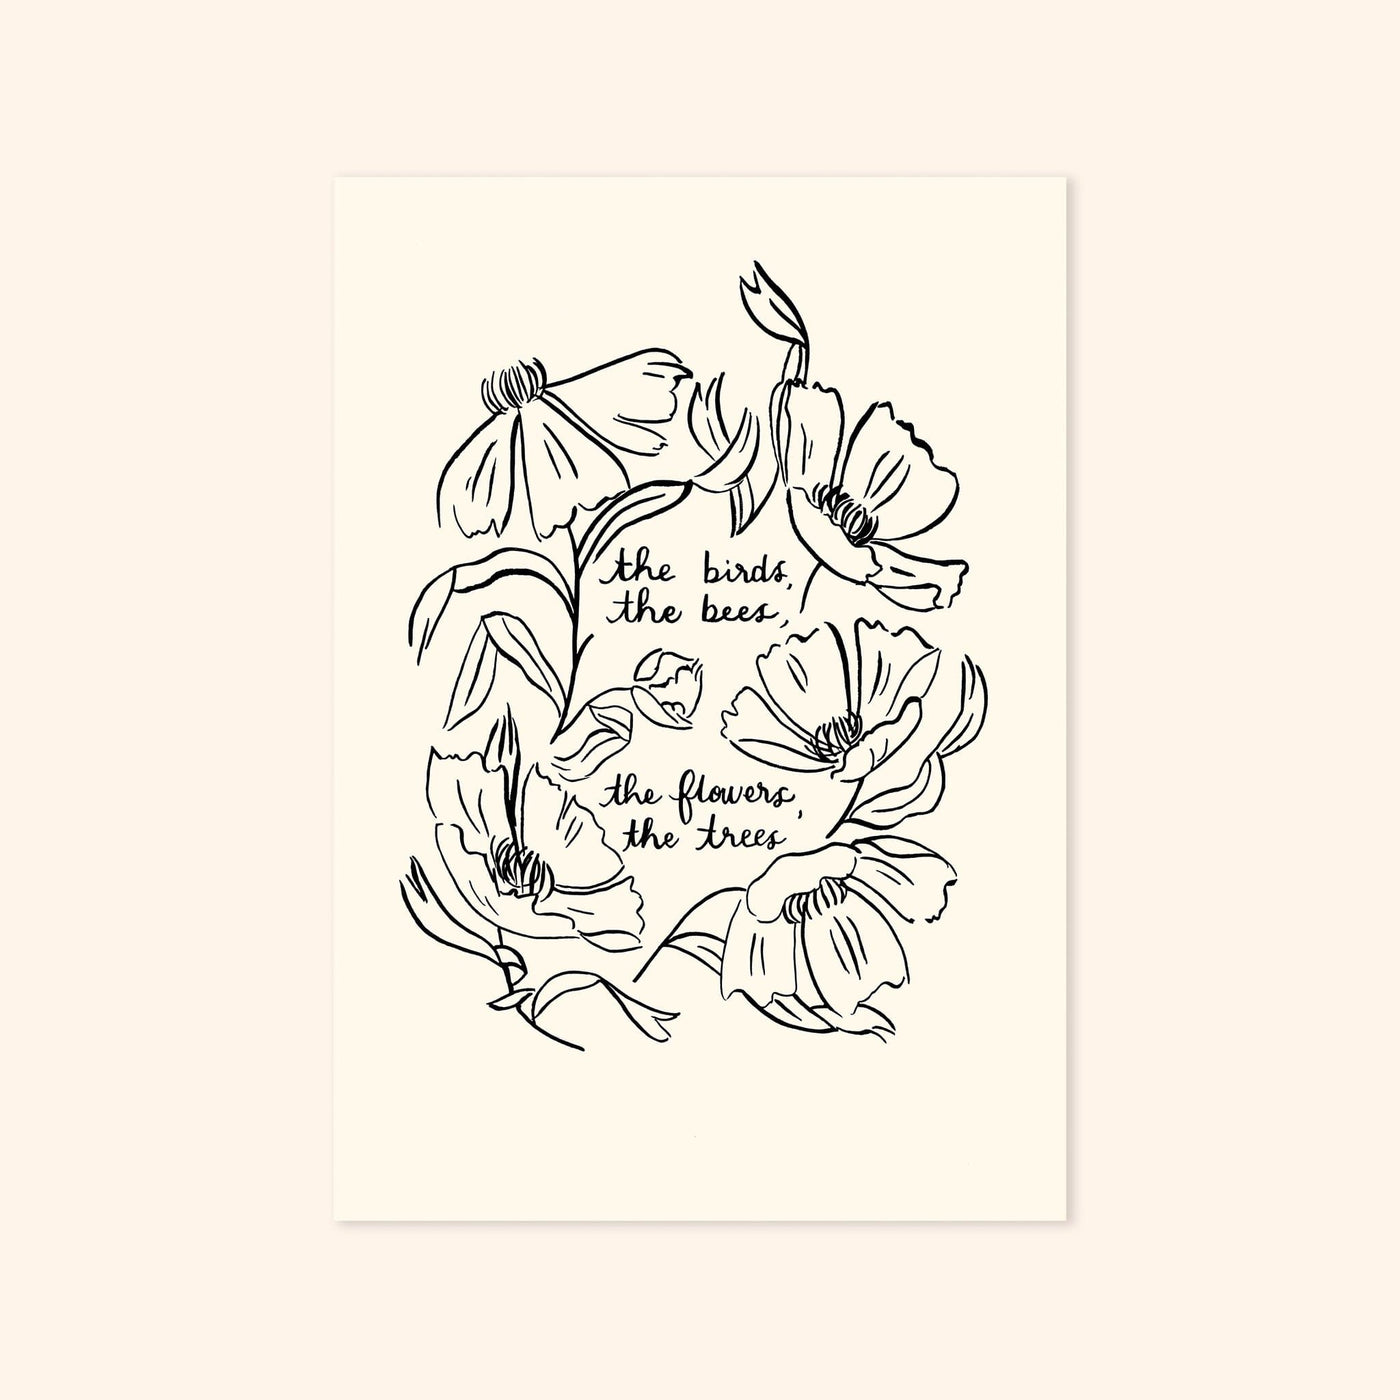 Black Floral Line Art Work Print With The Words The Birds The Bees The Flowers The Trees - Annie Dornan Smith